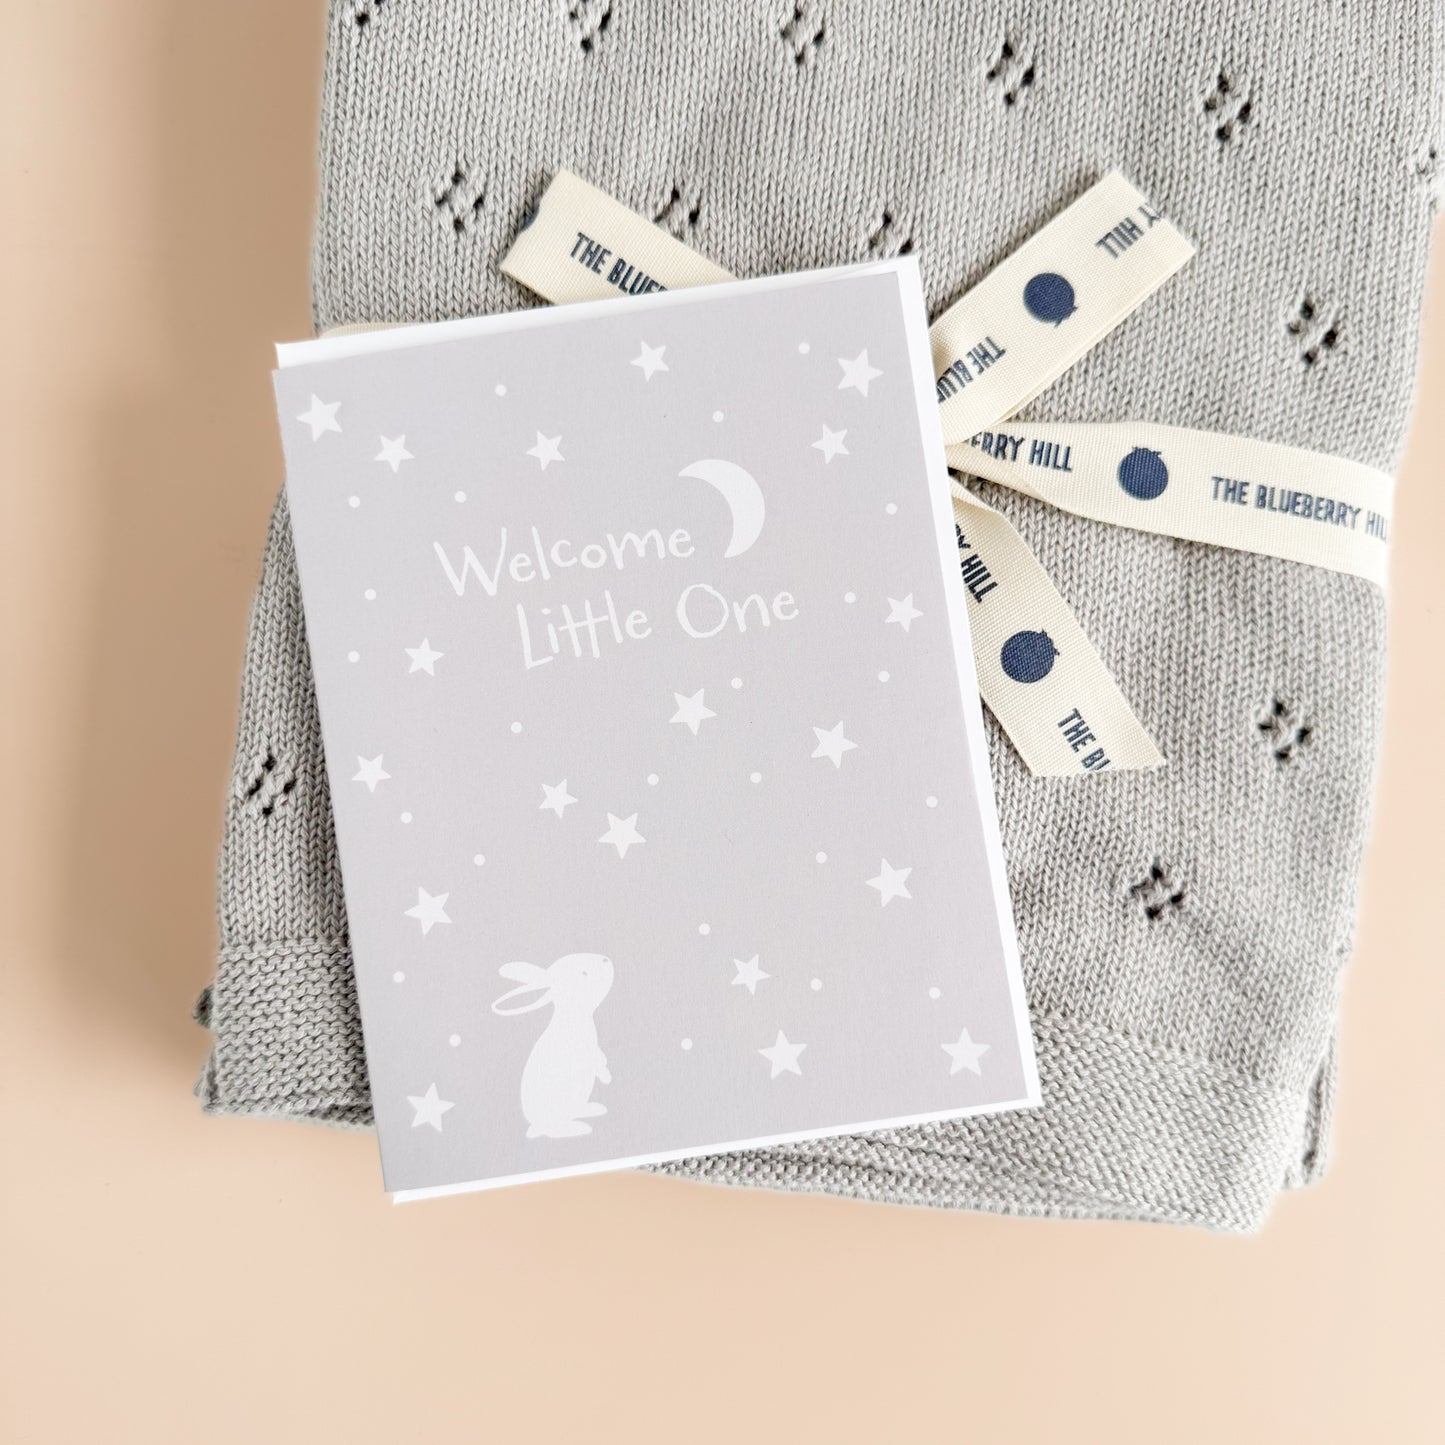 Welcome Little One Bunny Moon Stars Baby Greeting Card